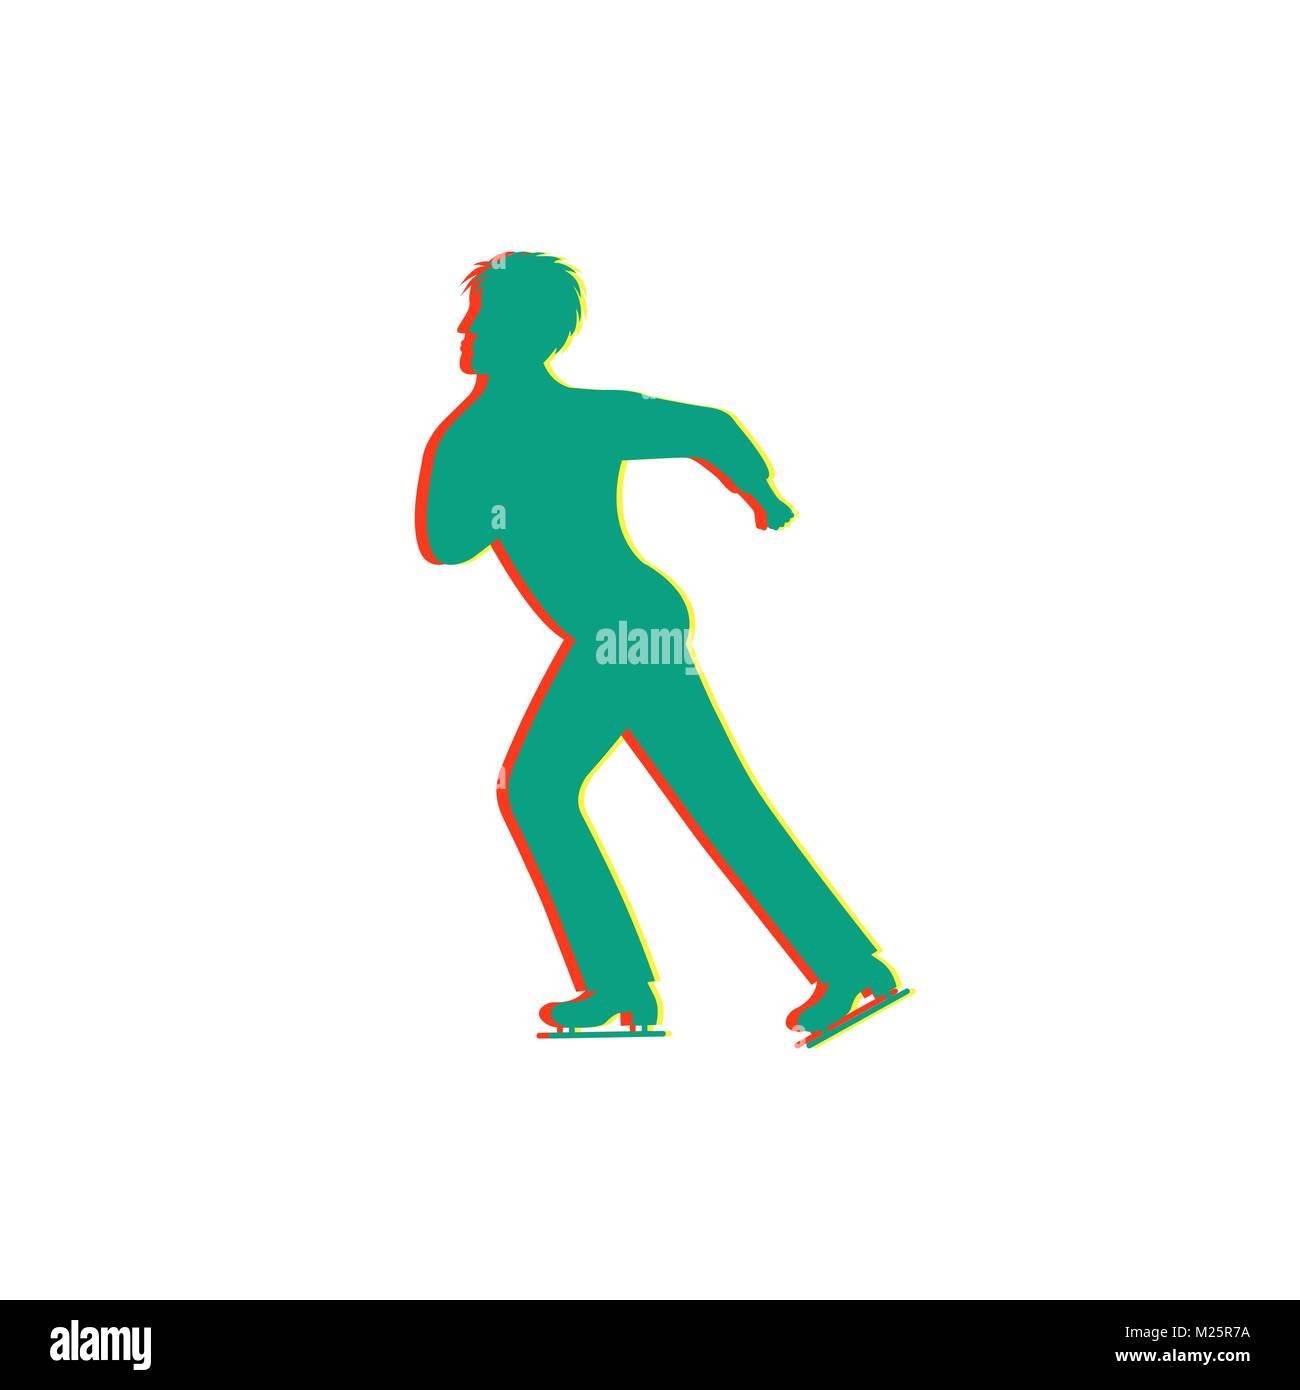 Men's figure skating. Isolated glitch icon Stock Vector